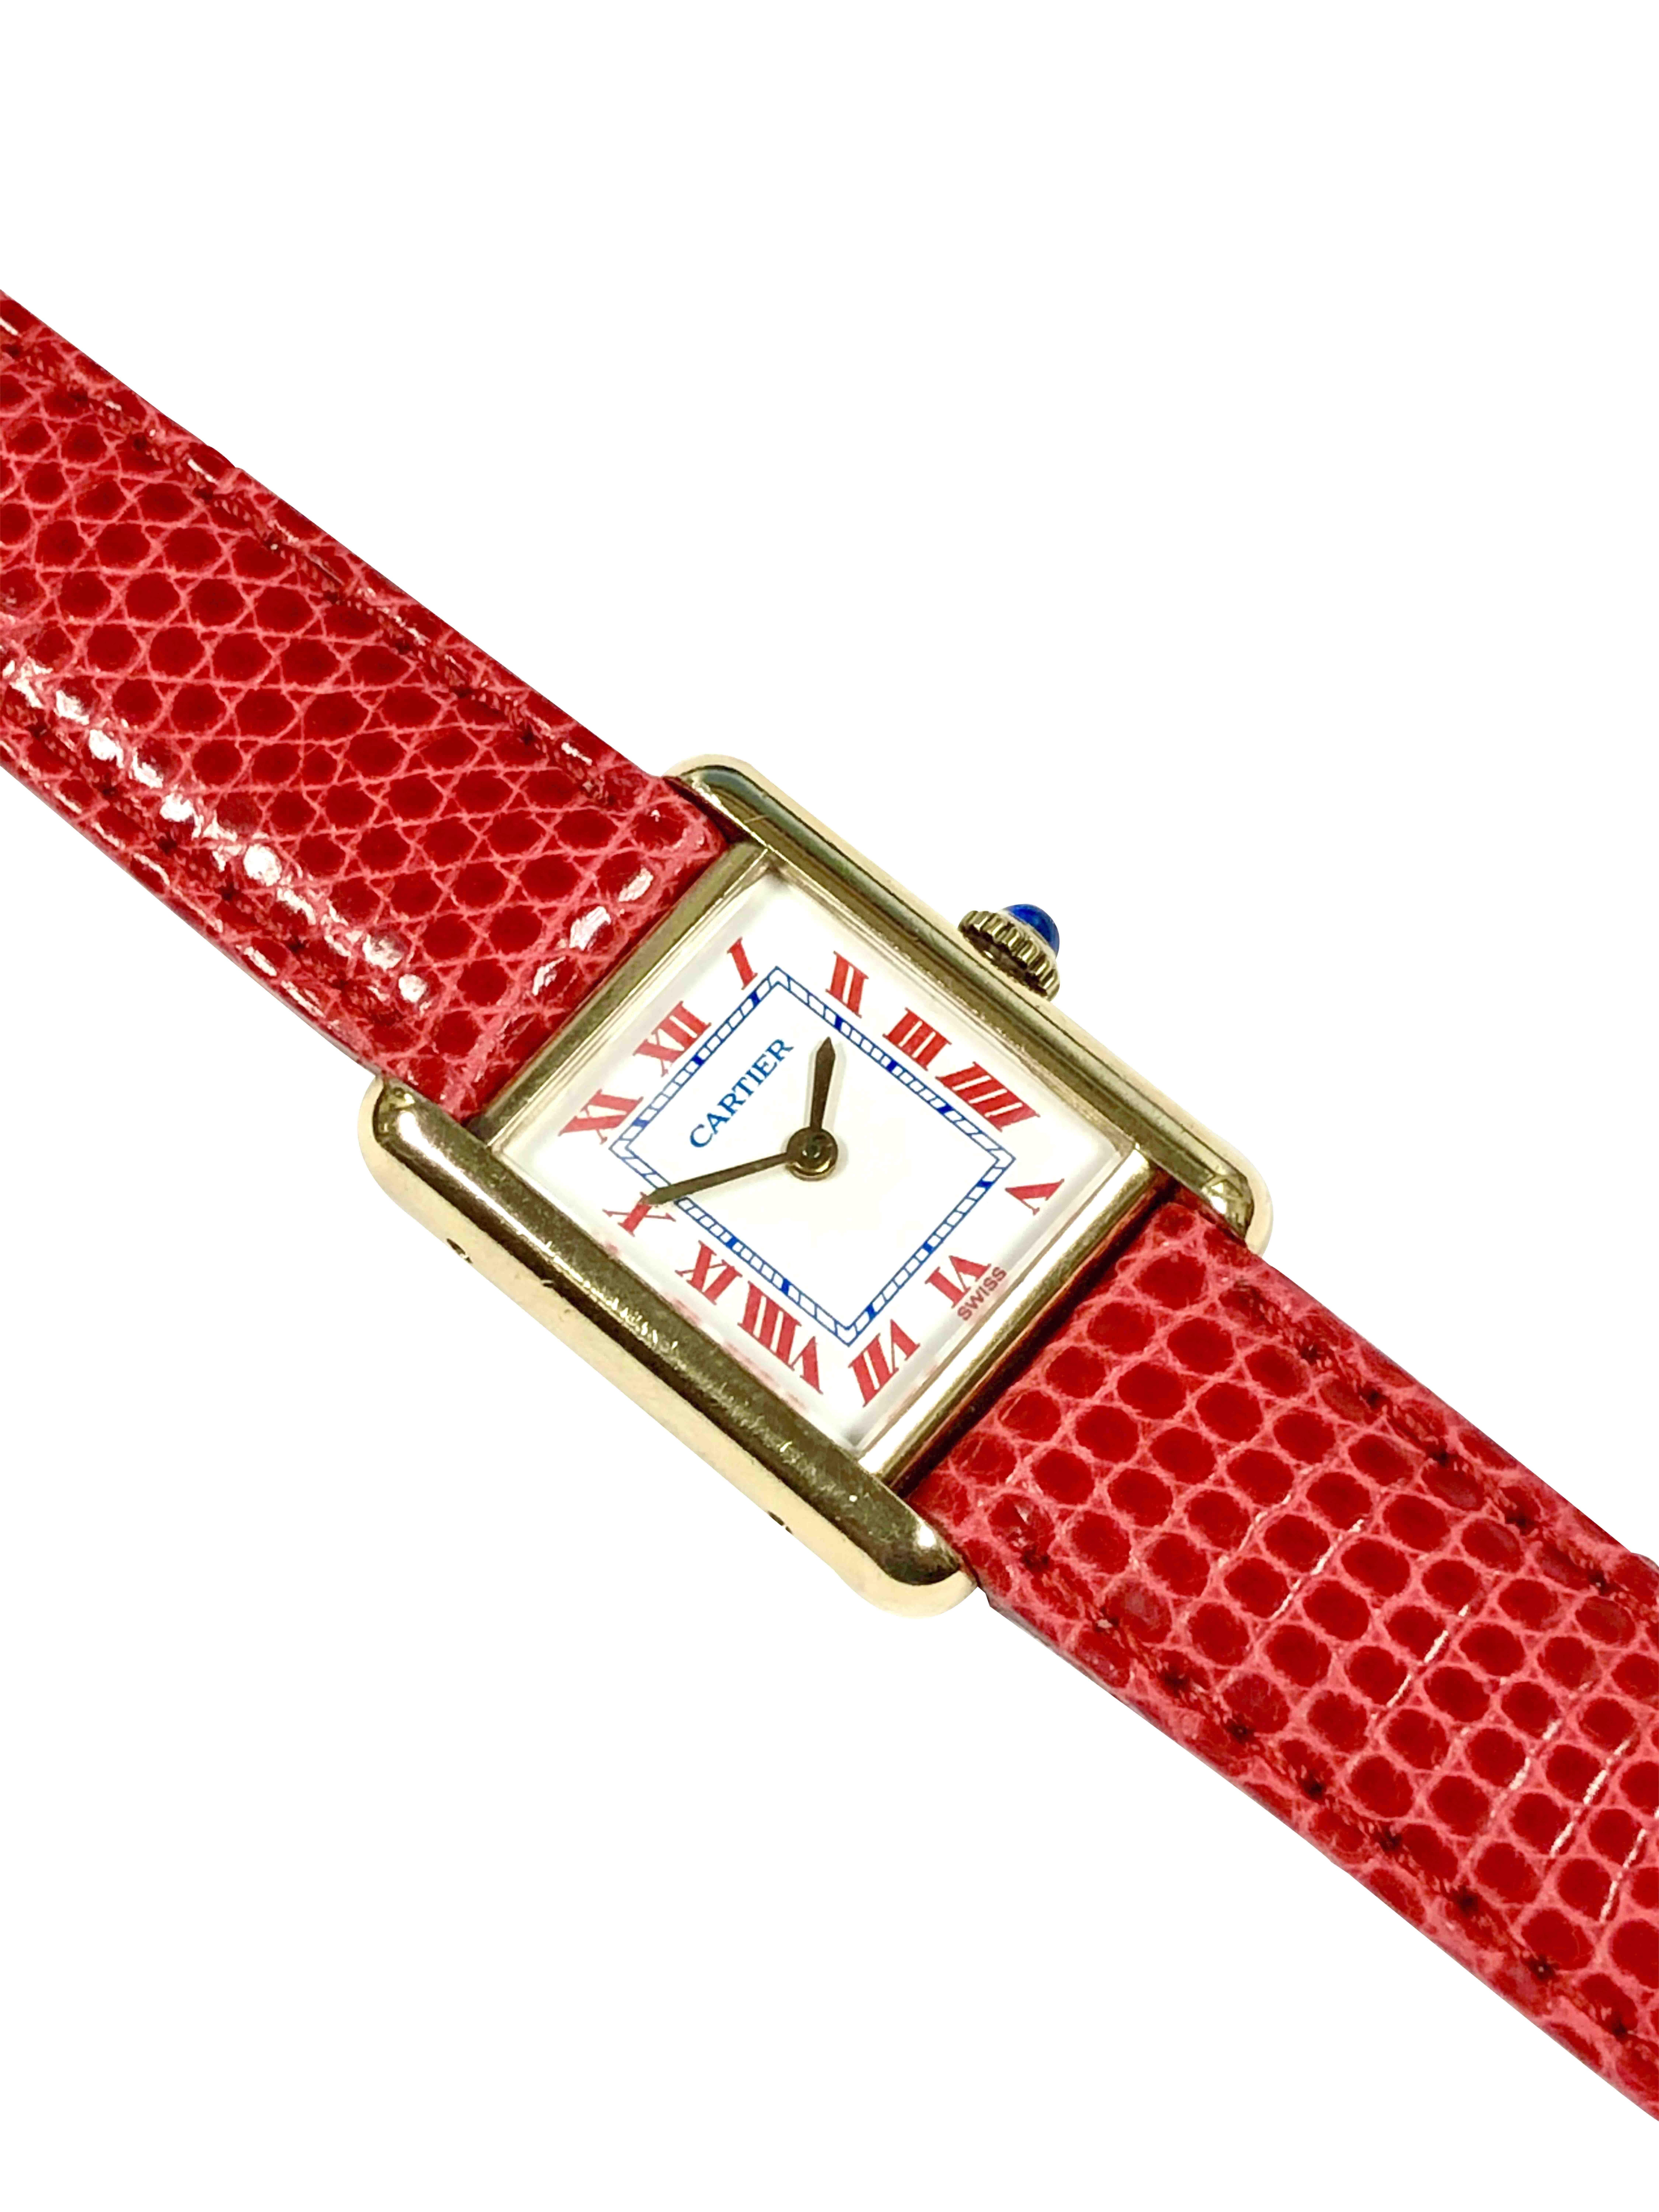 Circa 2000 Cartier Classic Tank Wrist Watch, 28 X 20 M.M. 2 Piece Vermeil ( Gold plate on Sterling Silver ) case. Mechanical, manual wind movement, White Gloss Dial with Red Roman Numerals and Blue inner Track, sapphire crown. New Red Lizard Strap